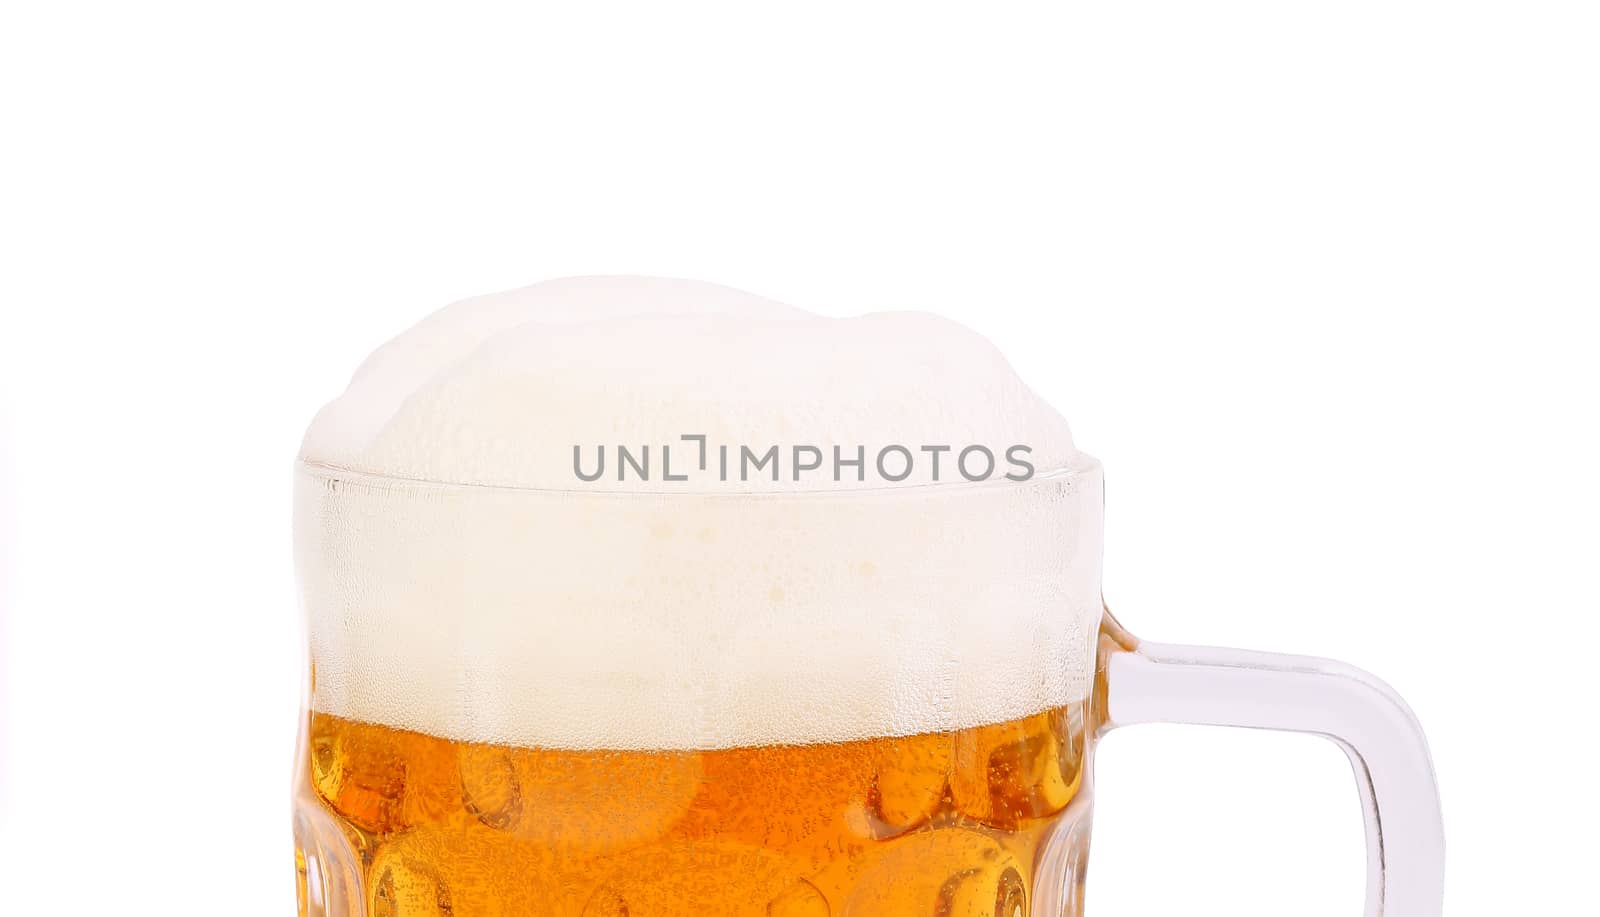 Top froth on the mug of beer isolated on white